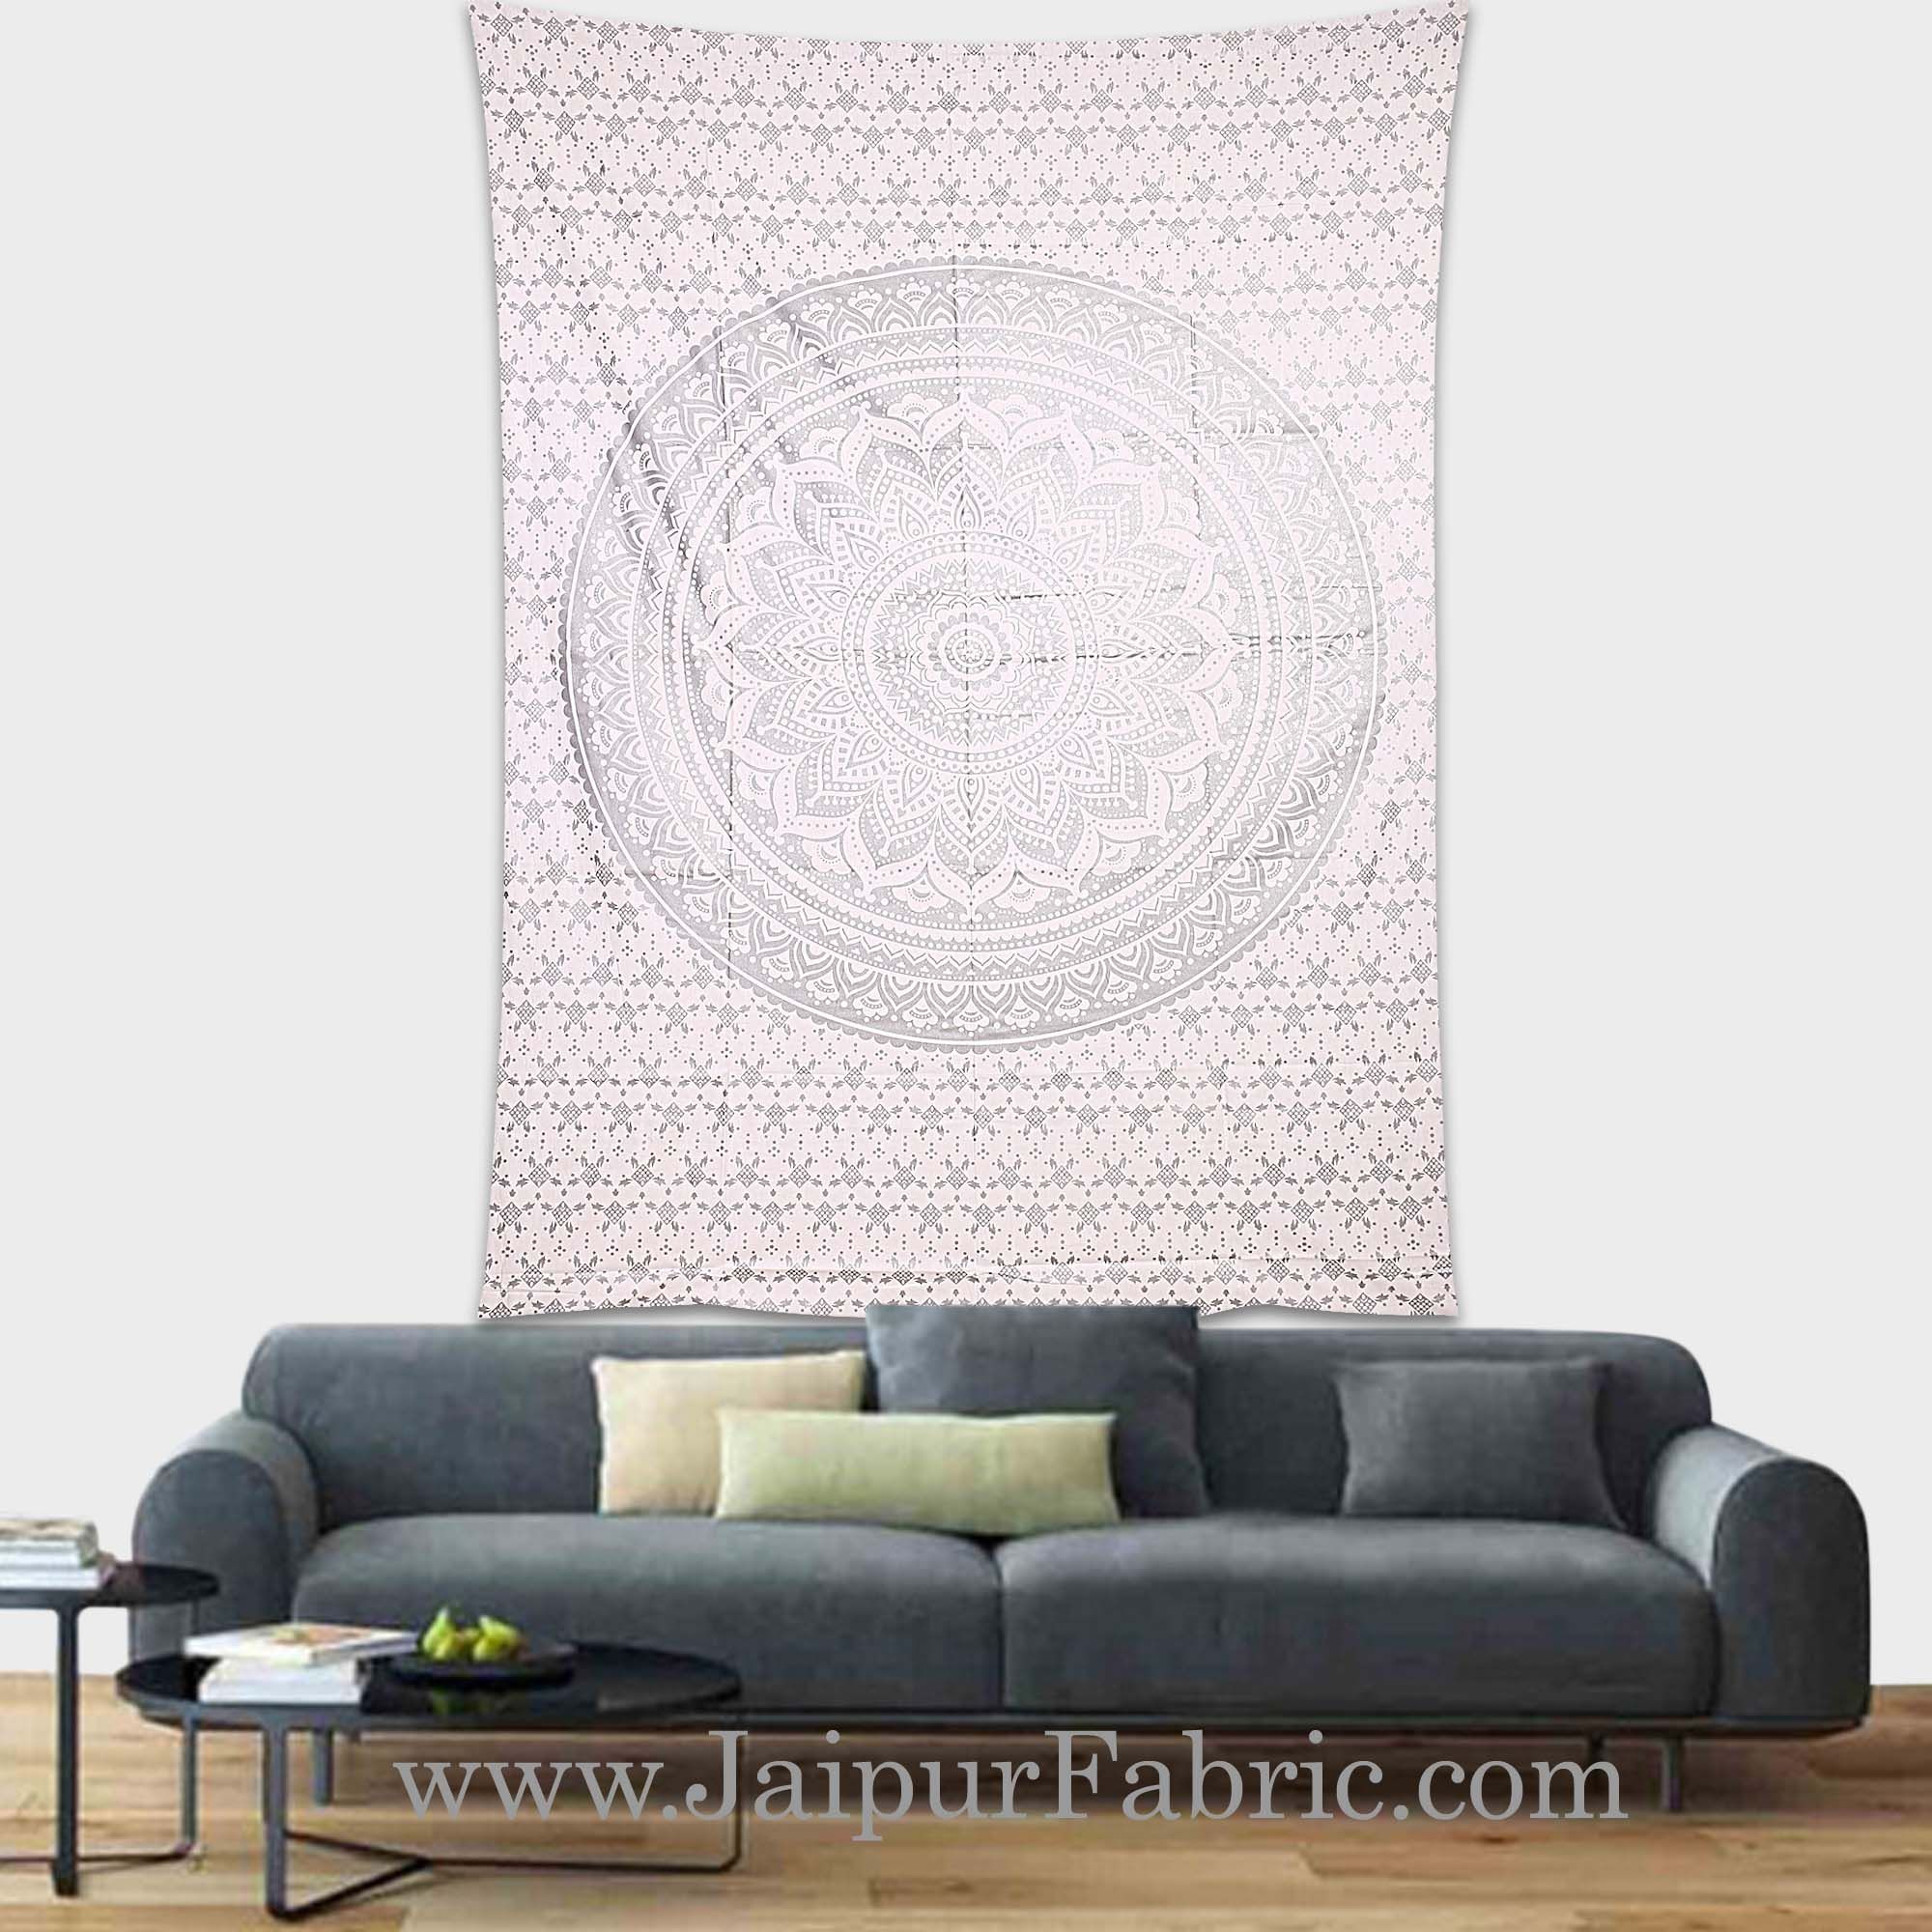 Silver Tapestry Ombre Mandala Wall Hanging Metallic Shine Bohemian Bedspread and beach throw 90x60